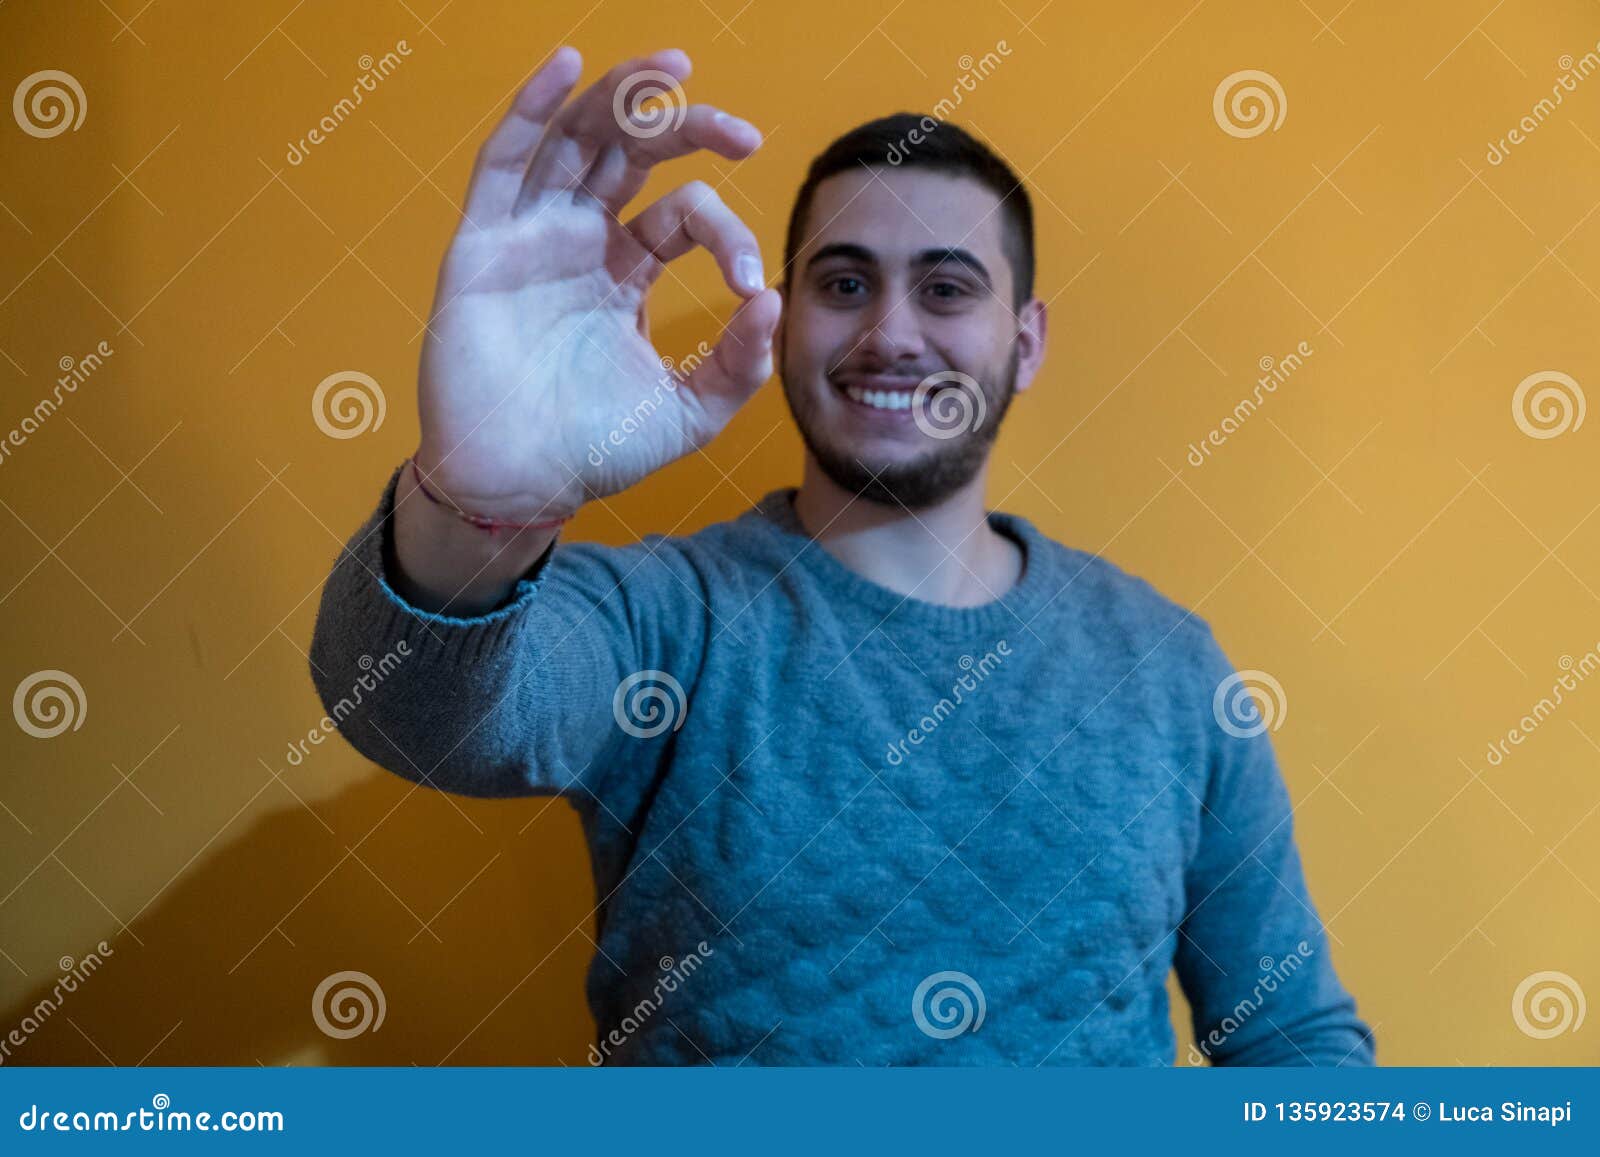 Man Who Expresses His Feelings through the Body Stock Photo - Image of ...